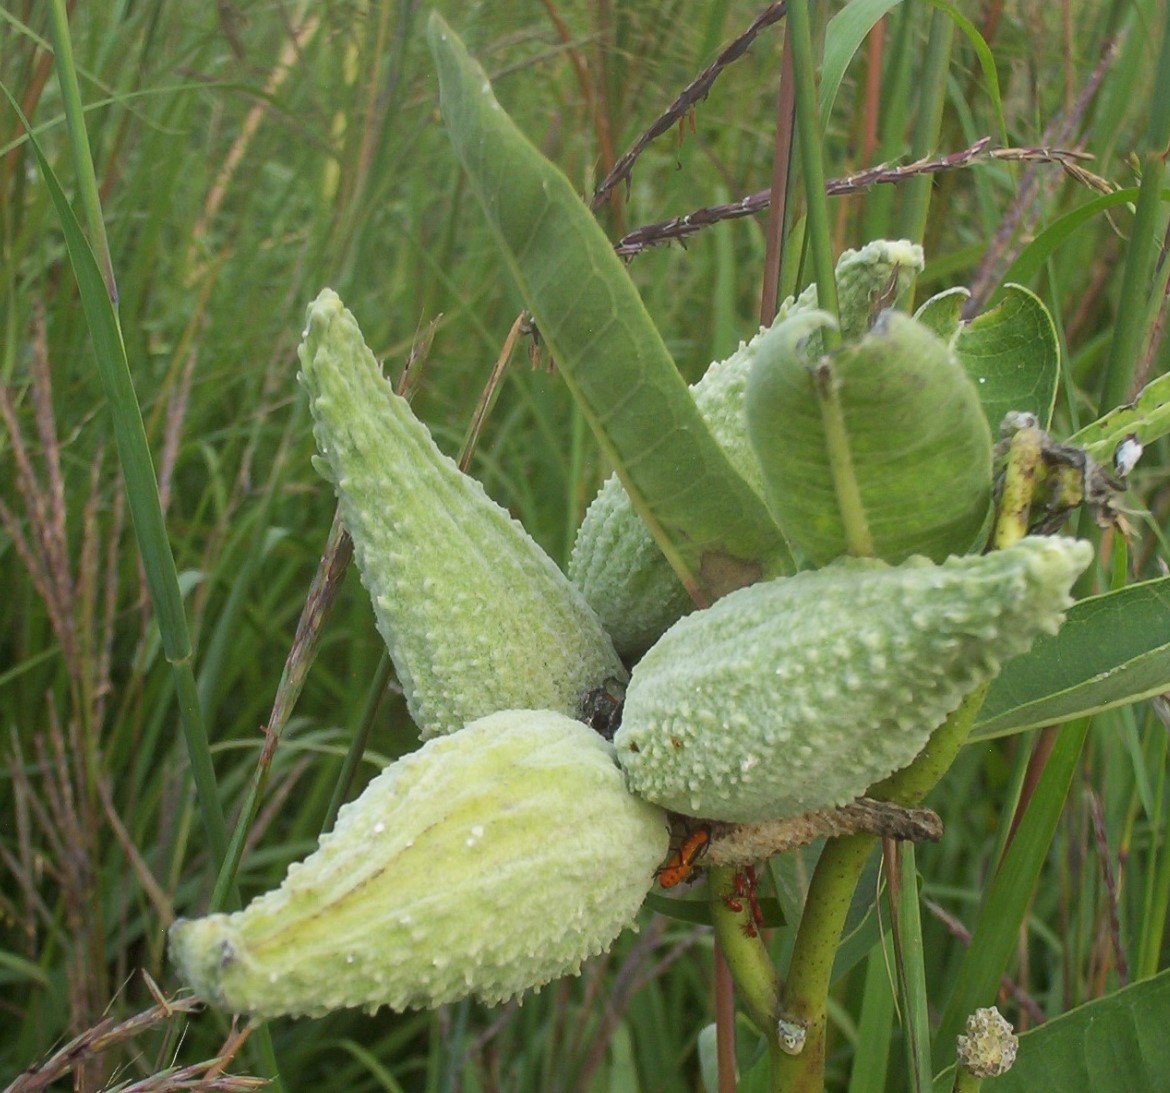 Four bumpy green milkweed pods on a plant.